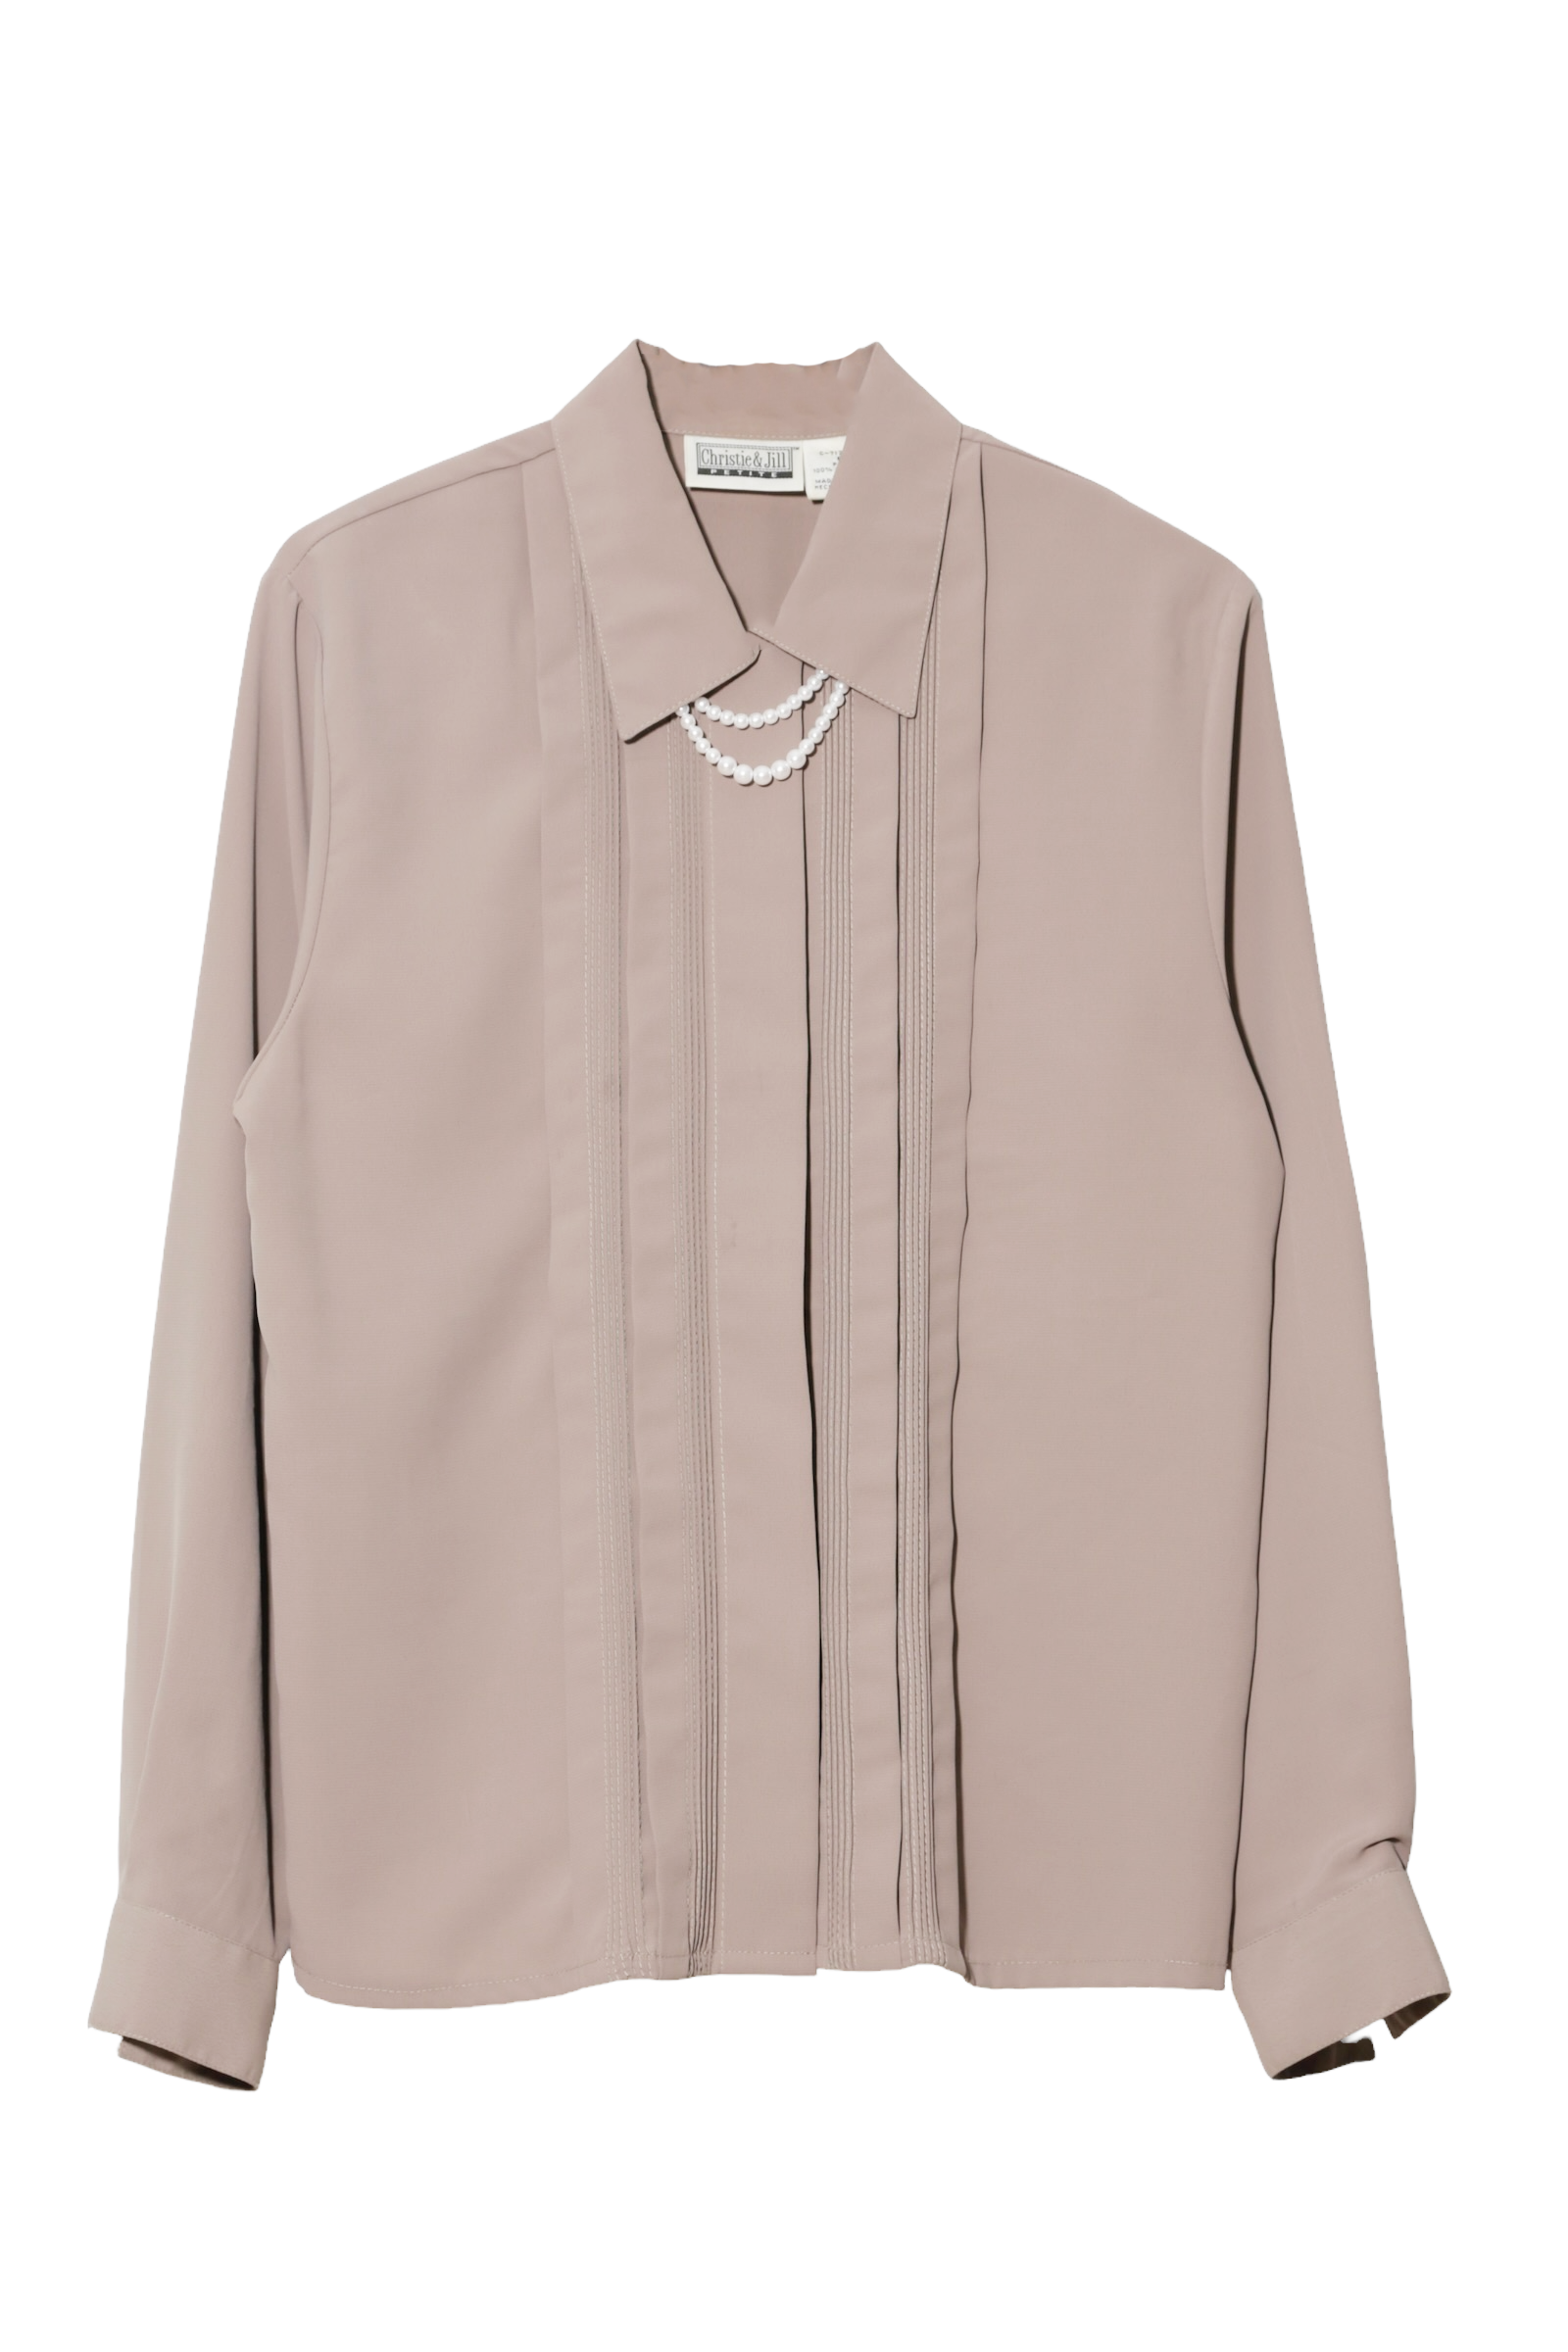 PEARL NECKLACE FRILL SHIRT